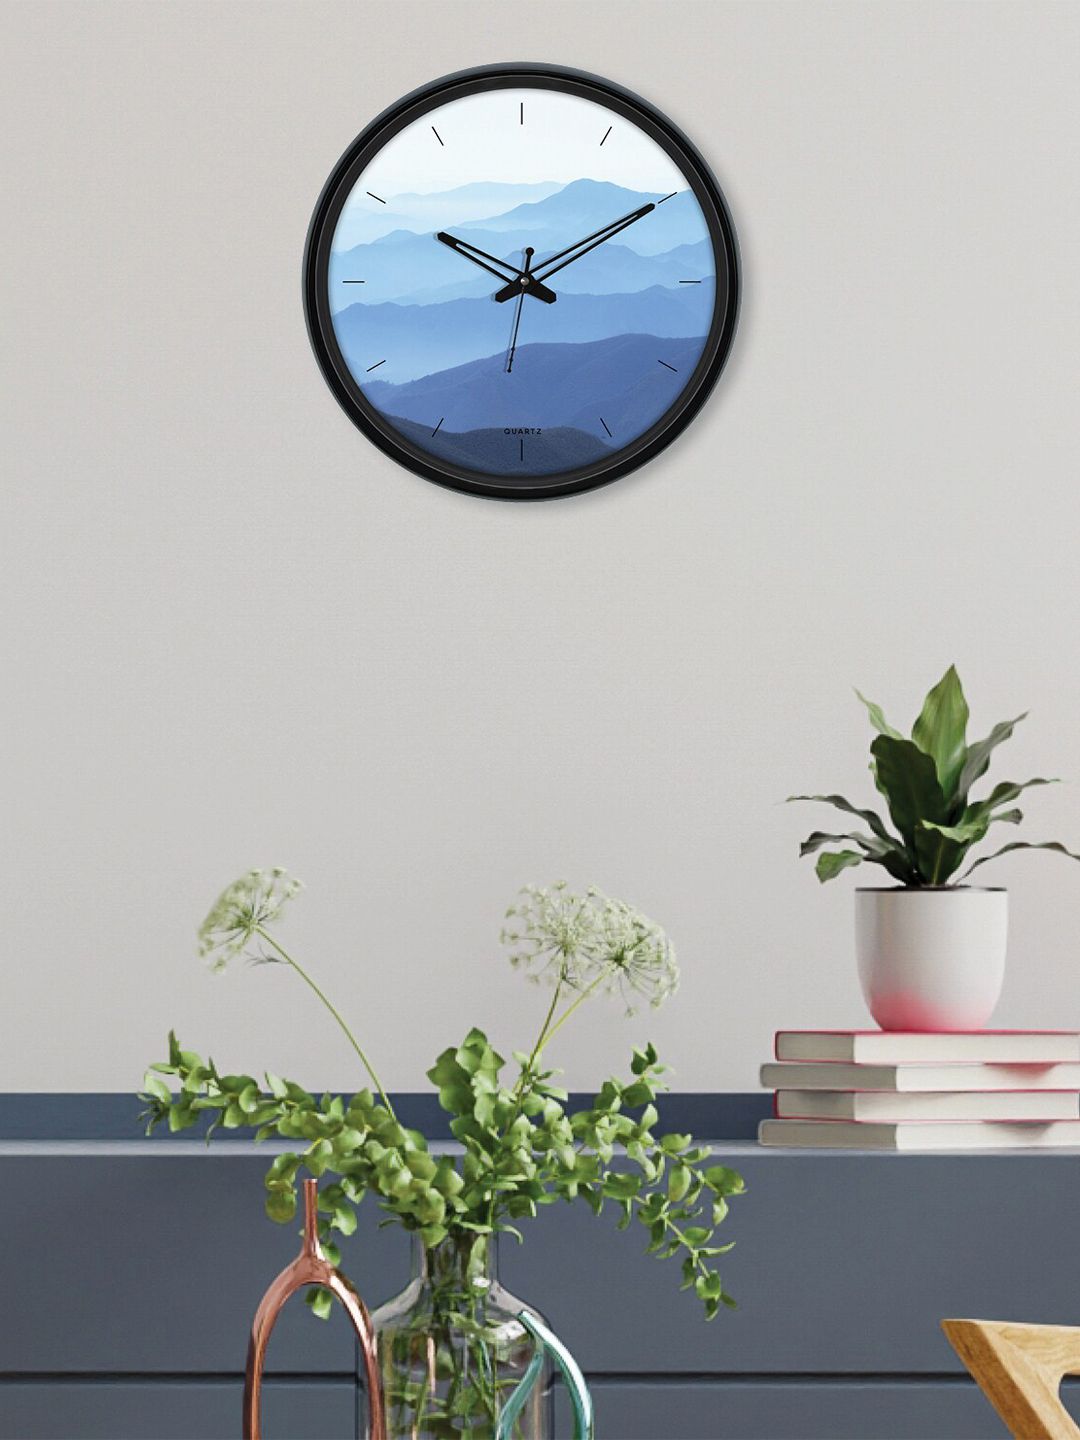 HomeTown Blue & White Printed Contemporary Wall Clock Price in India